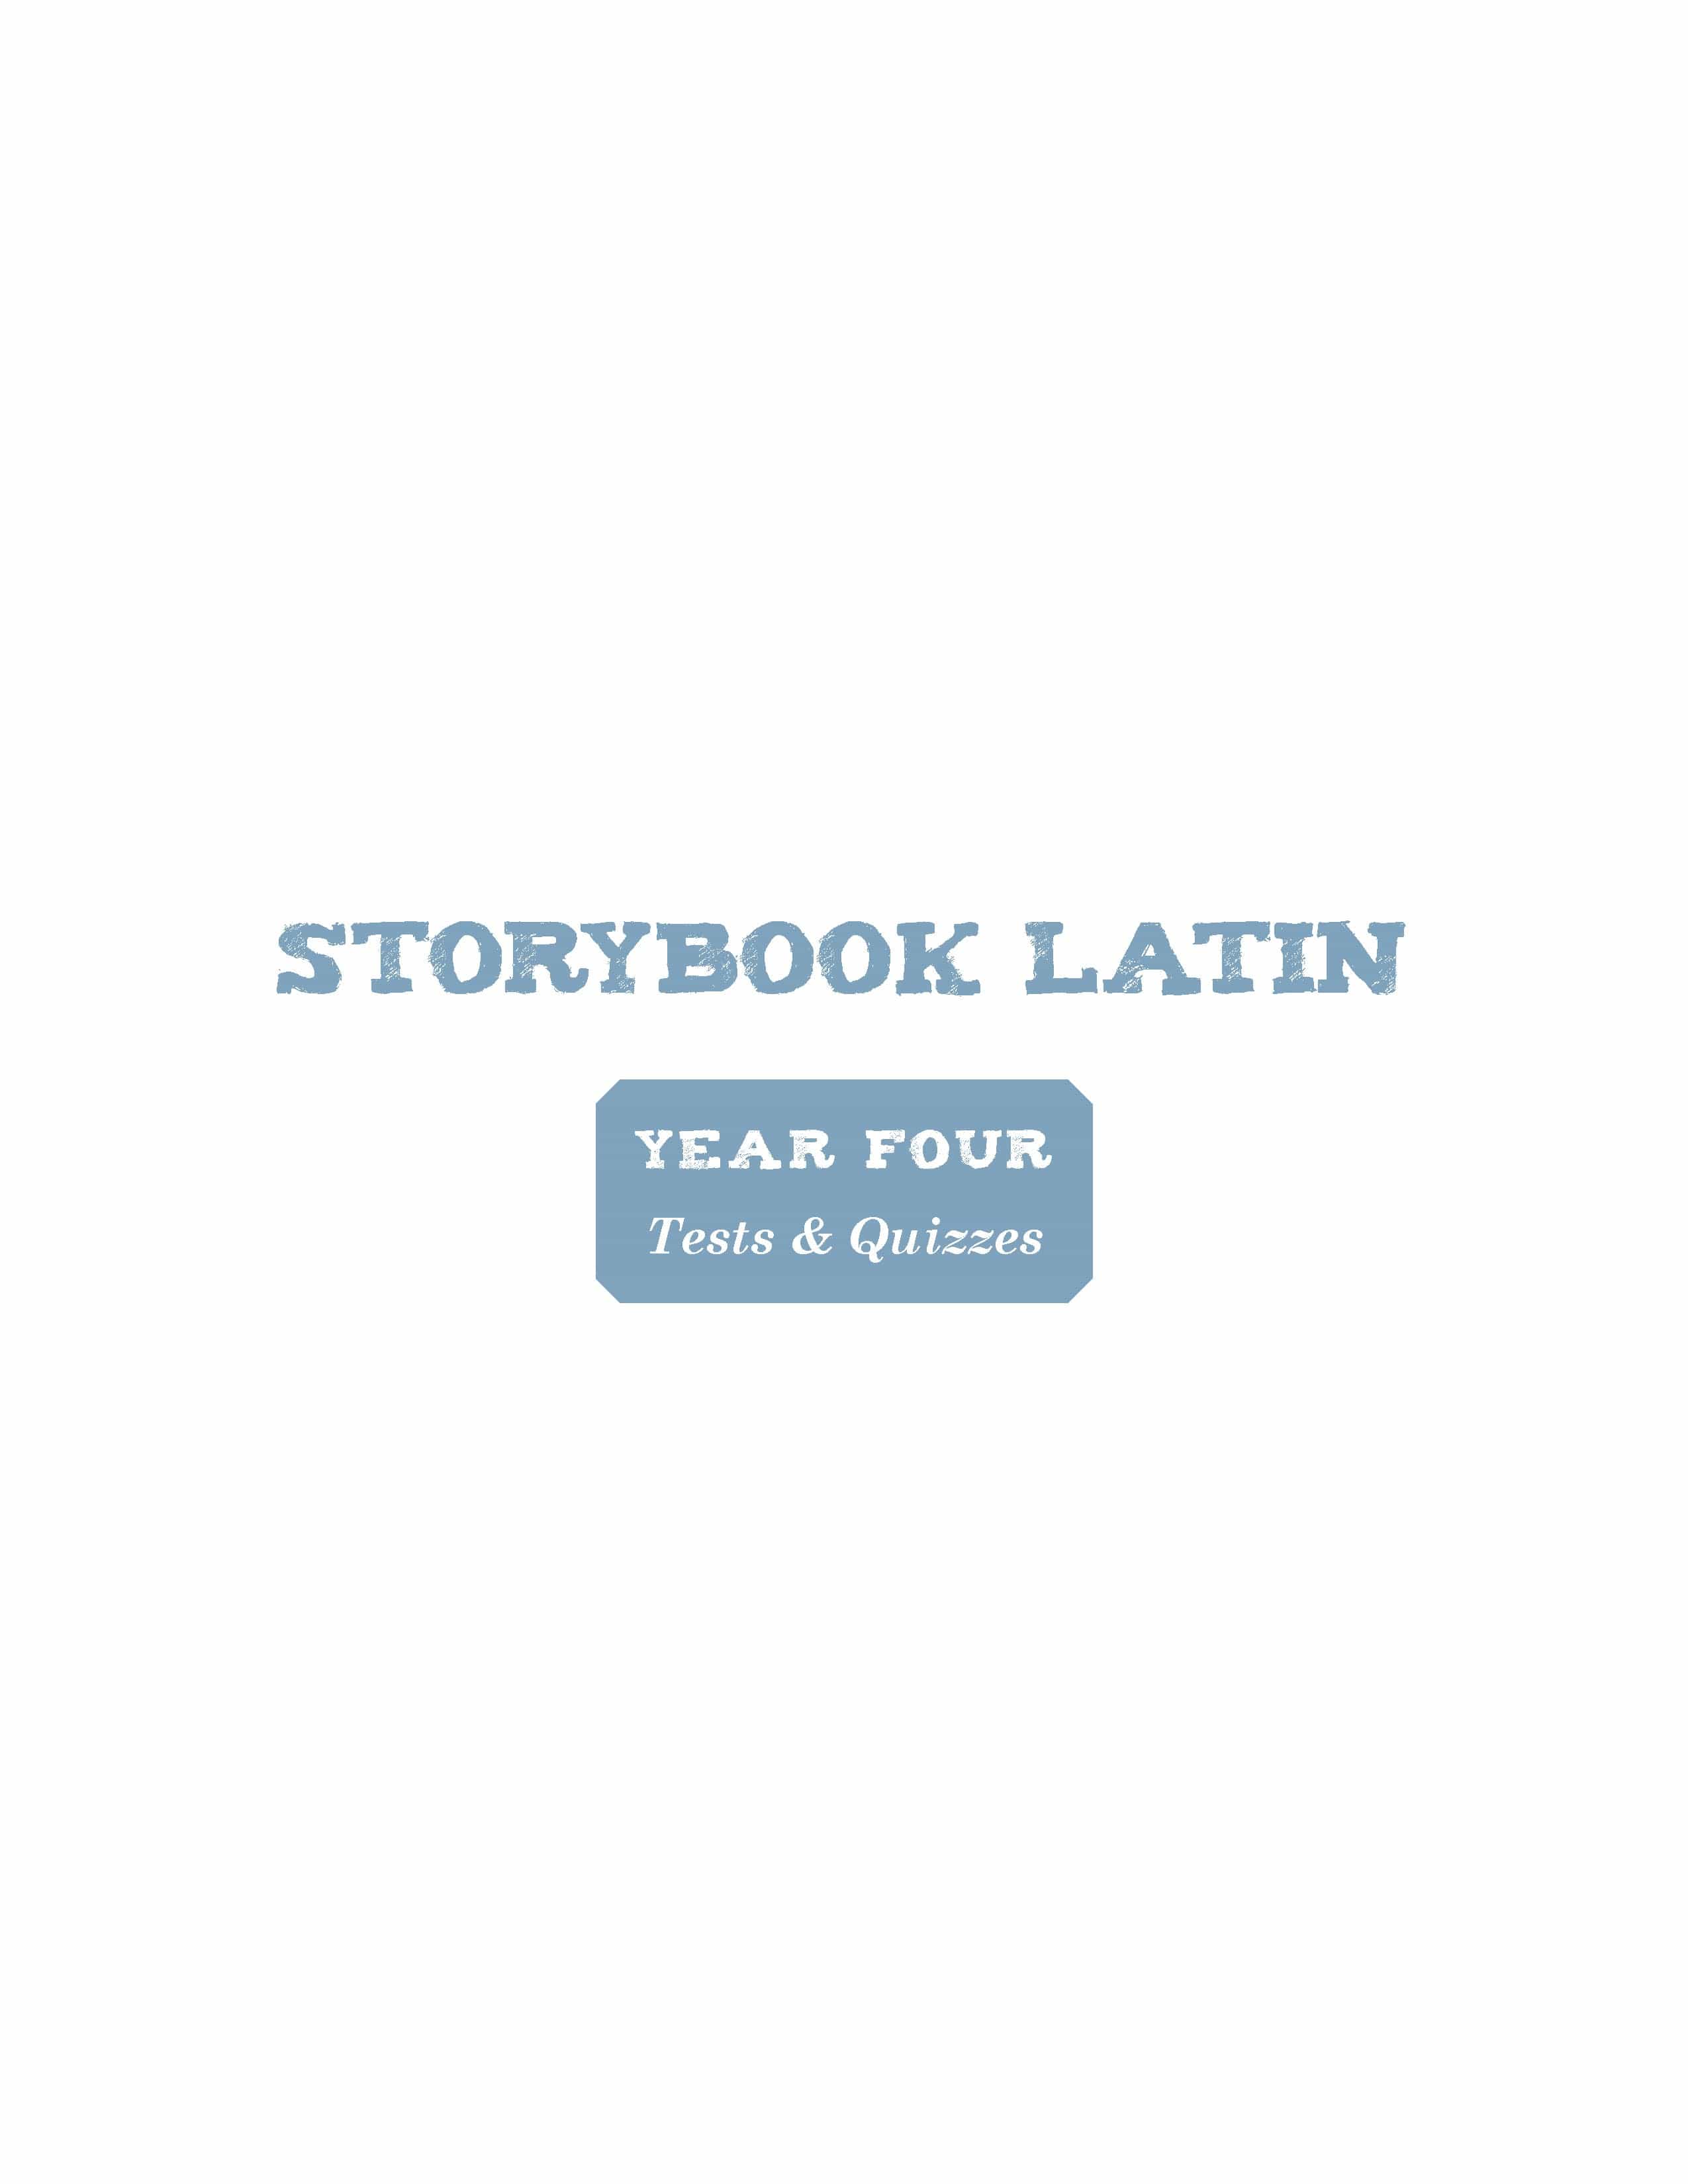 Storybook Latin Year 4 Tests & Quizzes